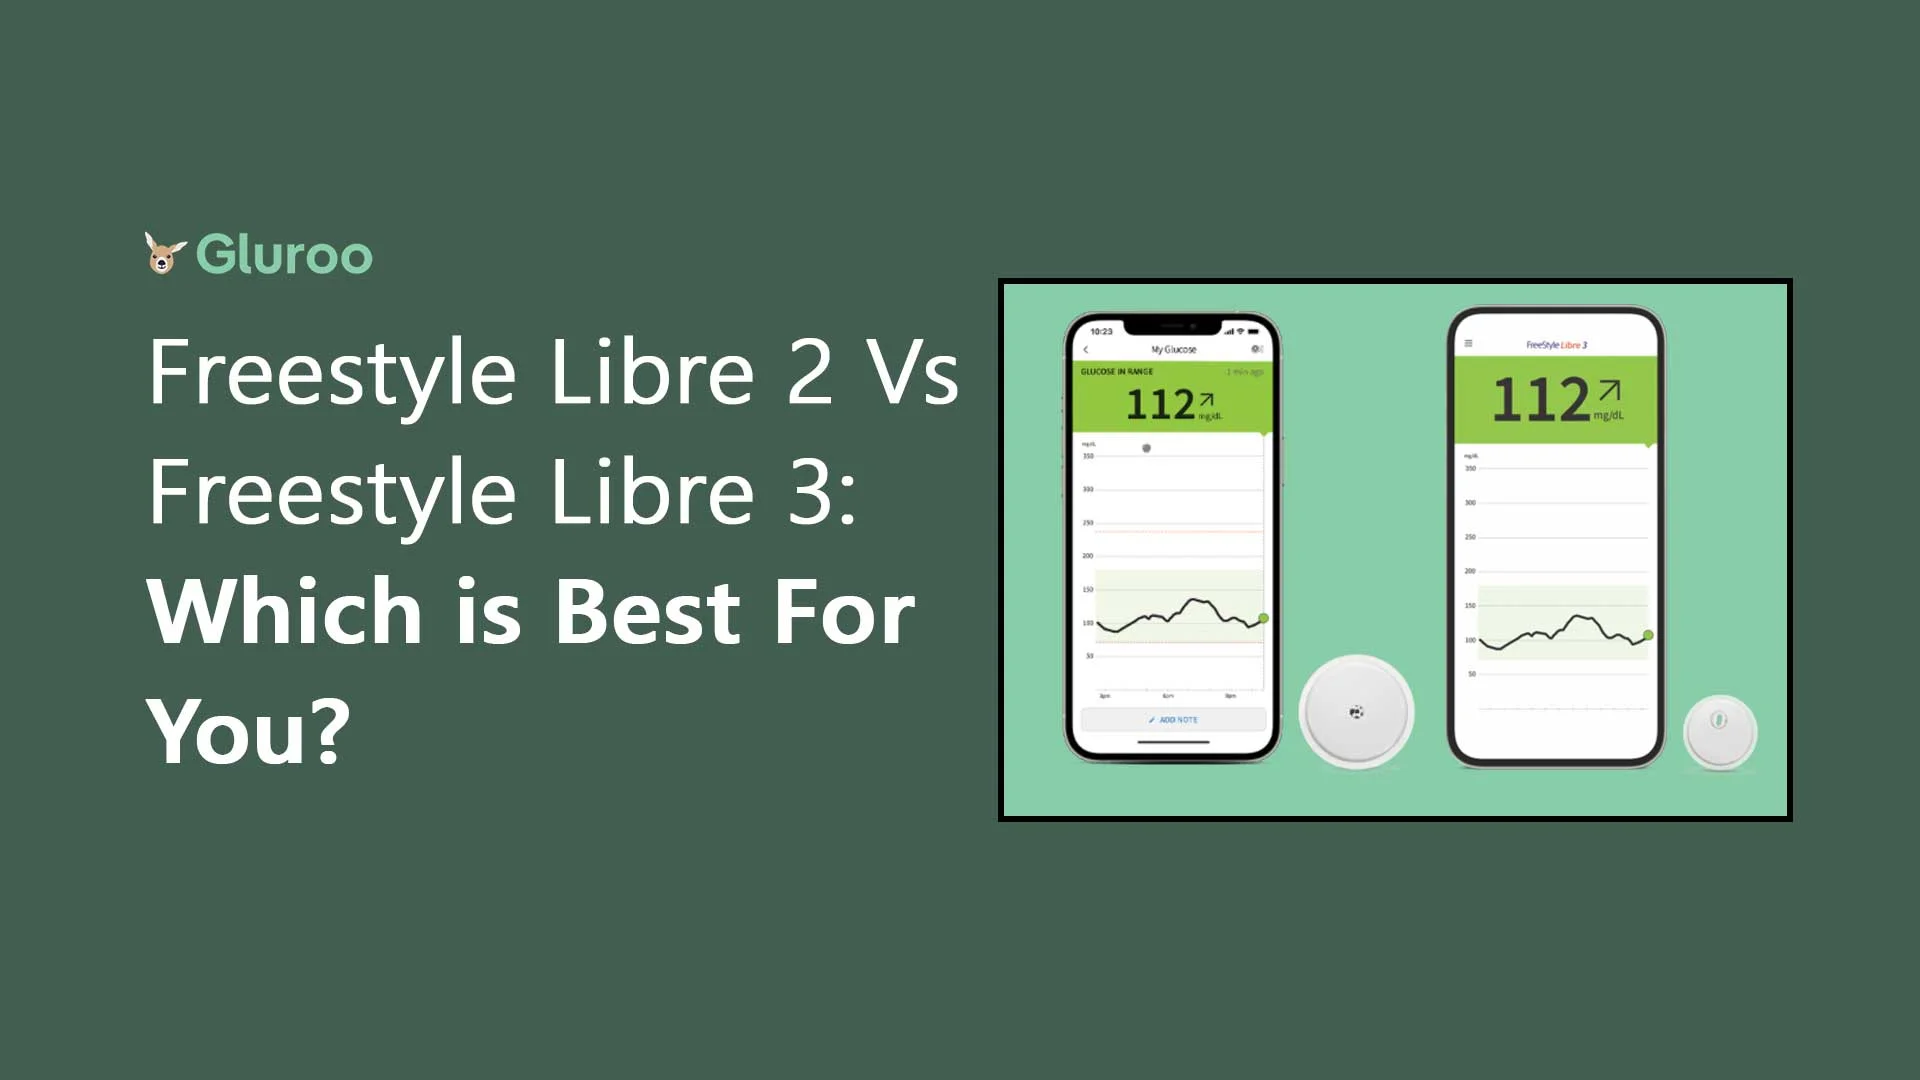 Difference Between Freestyle Libre 2 and Freestyle Libre 3